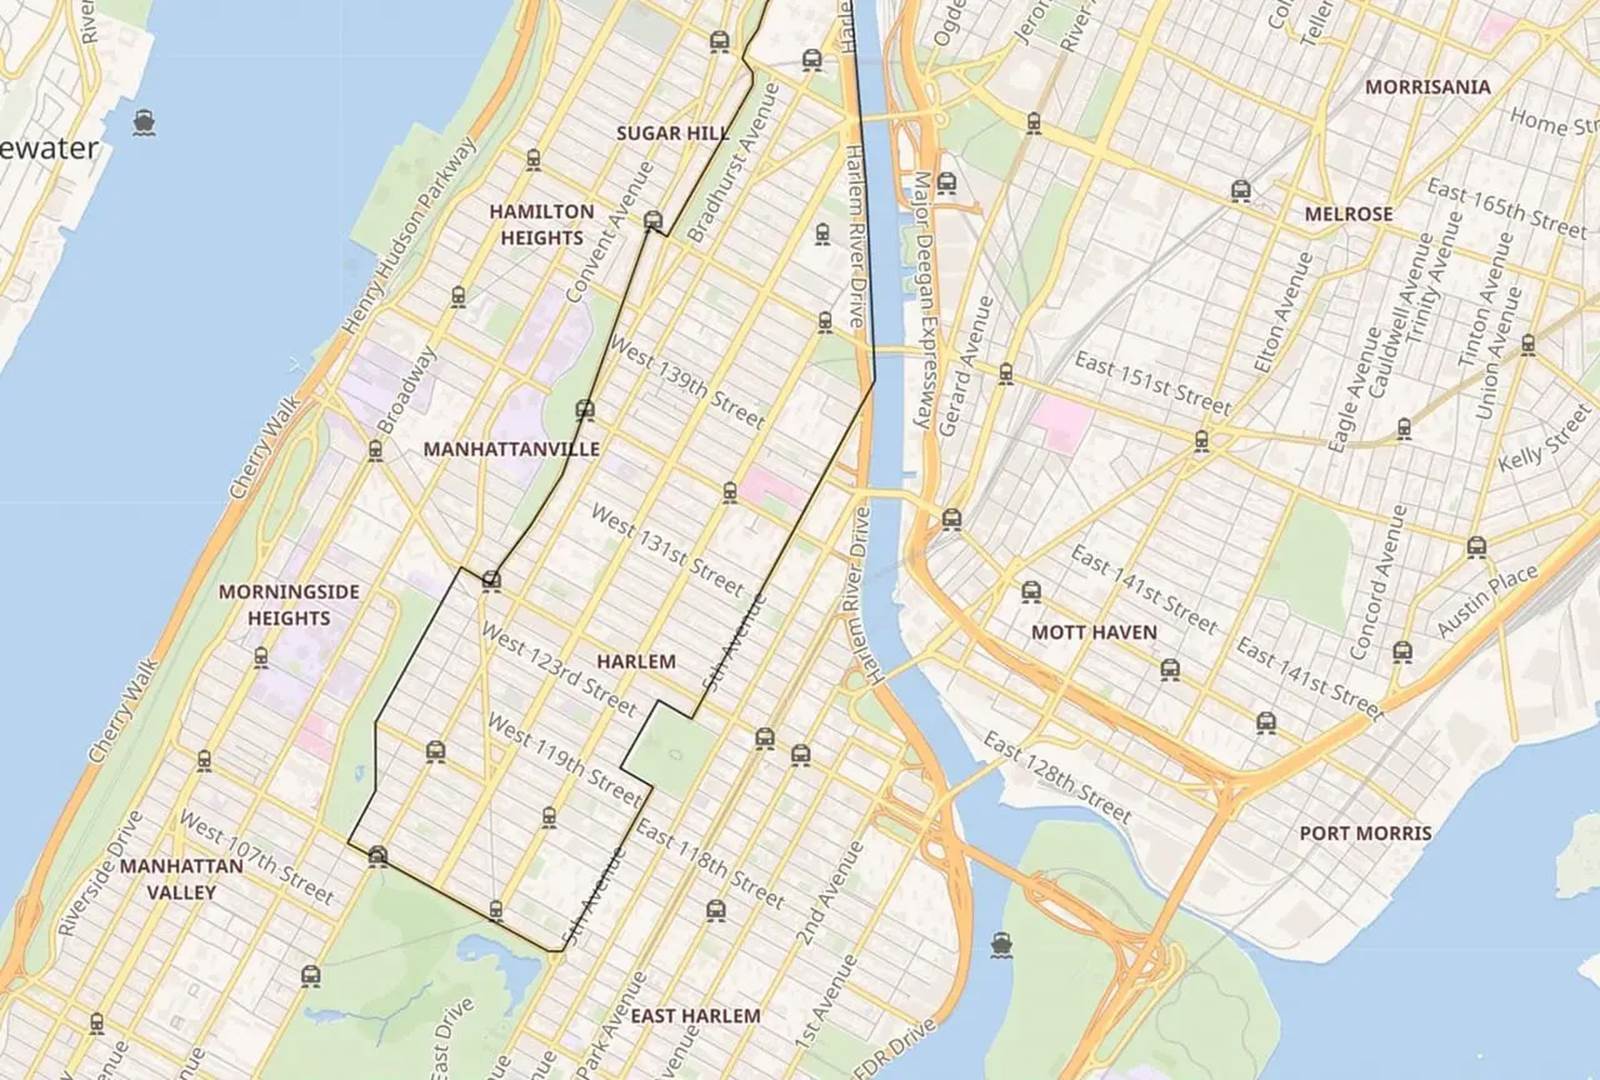 A map of New York with Harlem outlined in a black border for emphasis.